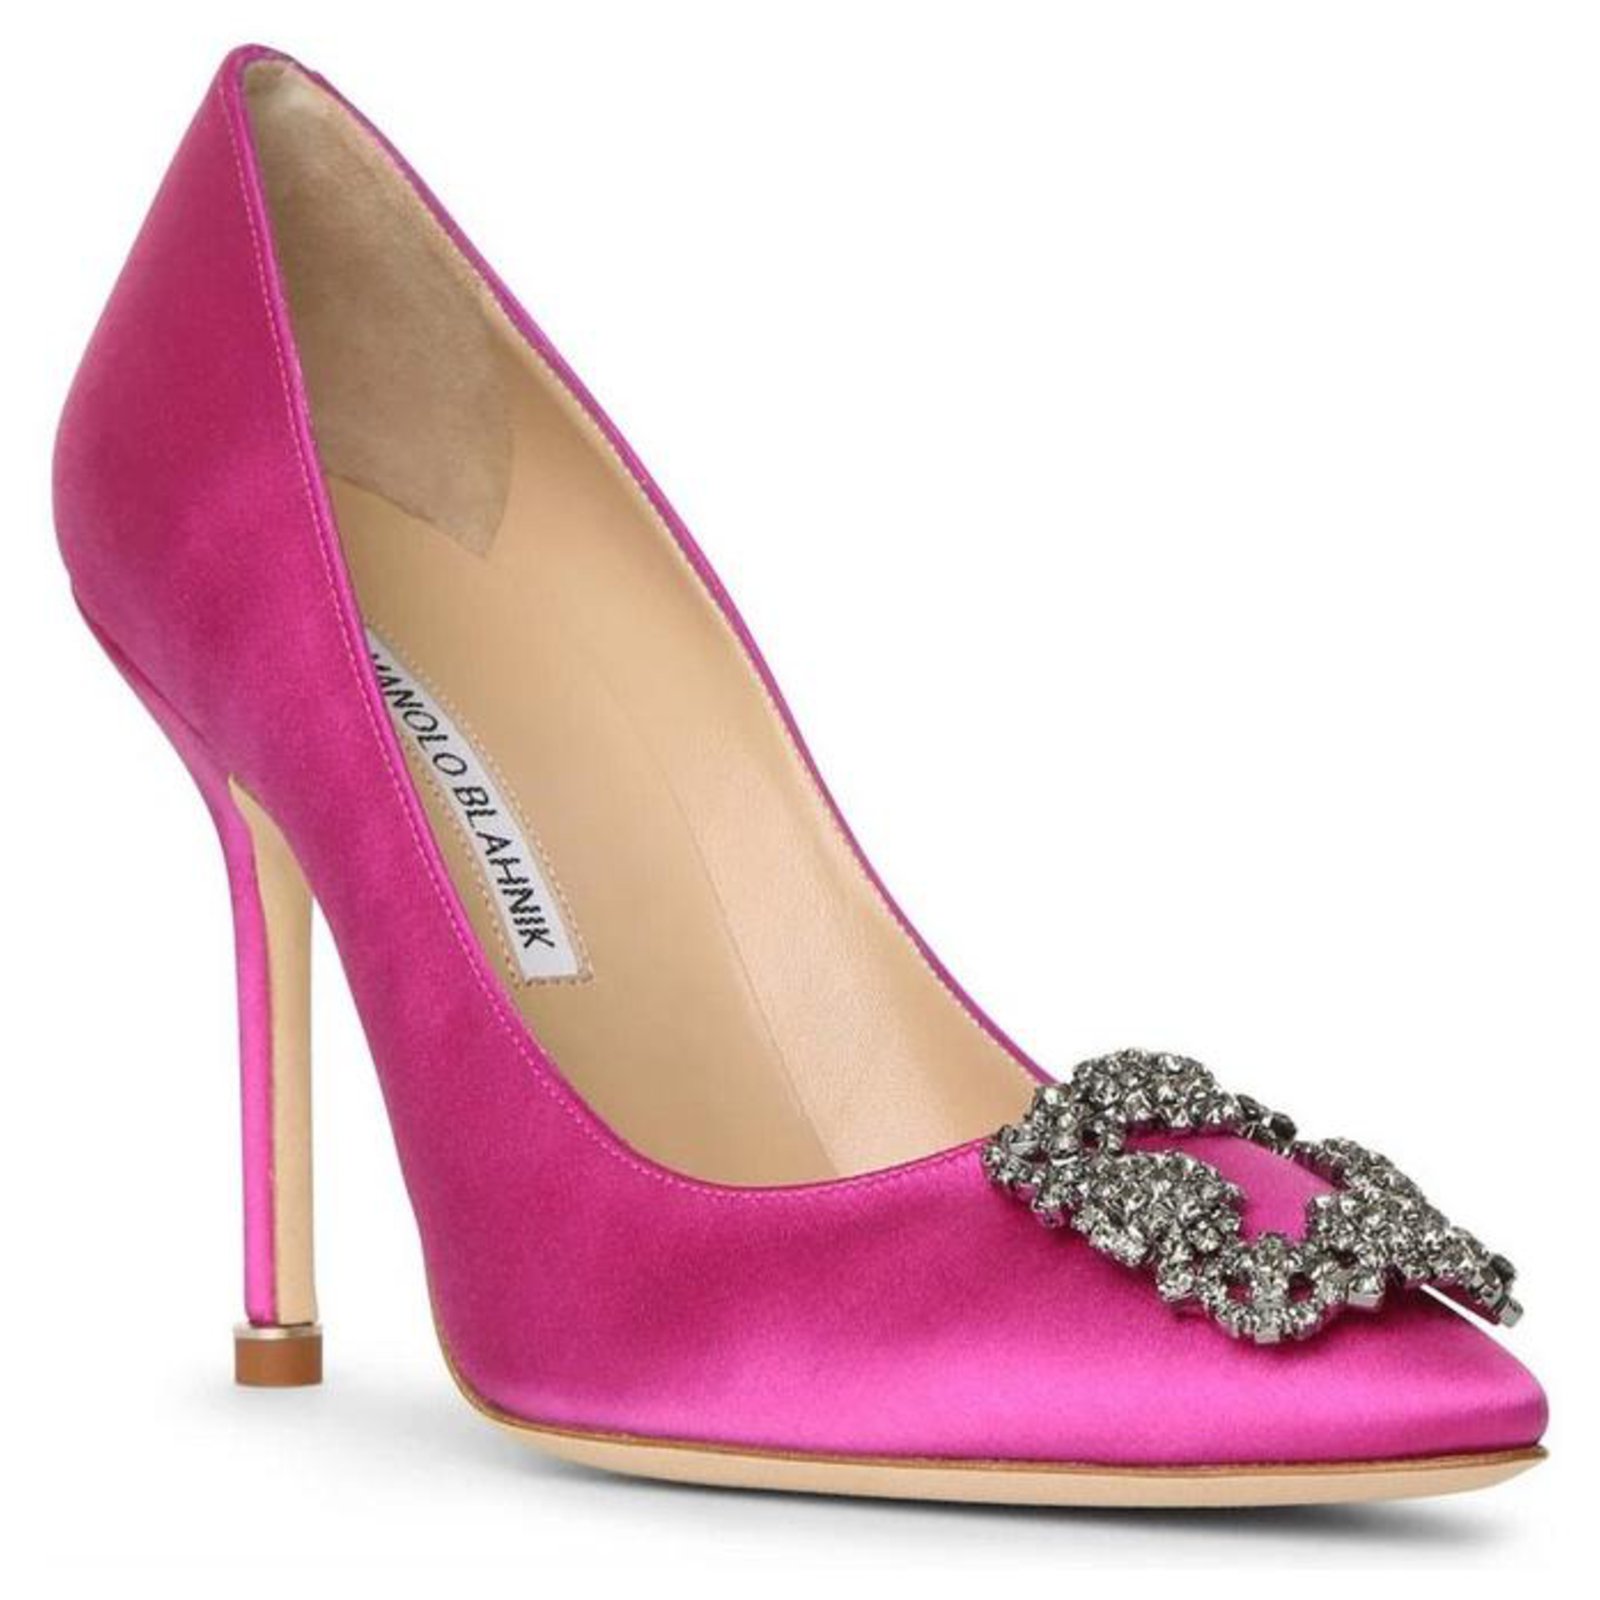 7 Fun Facts About Manolo Blahnik's Famous Sex and the City Heels